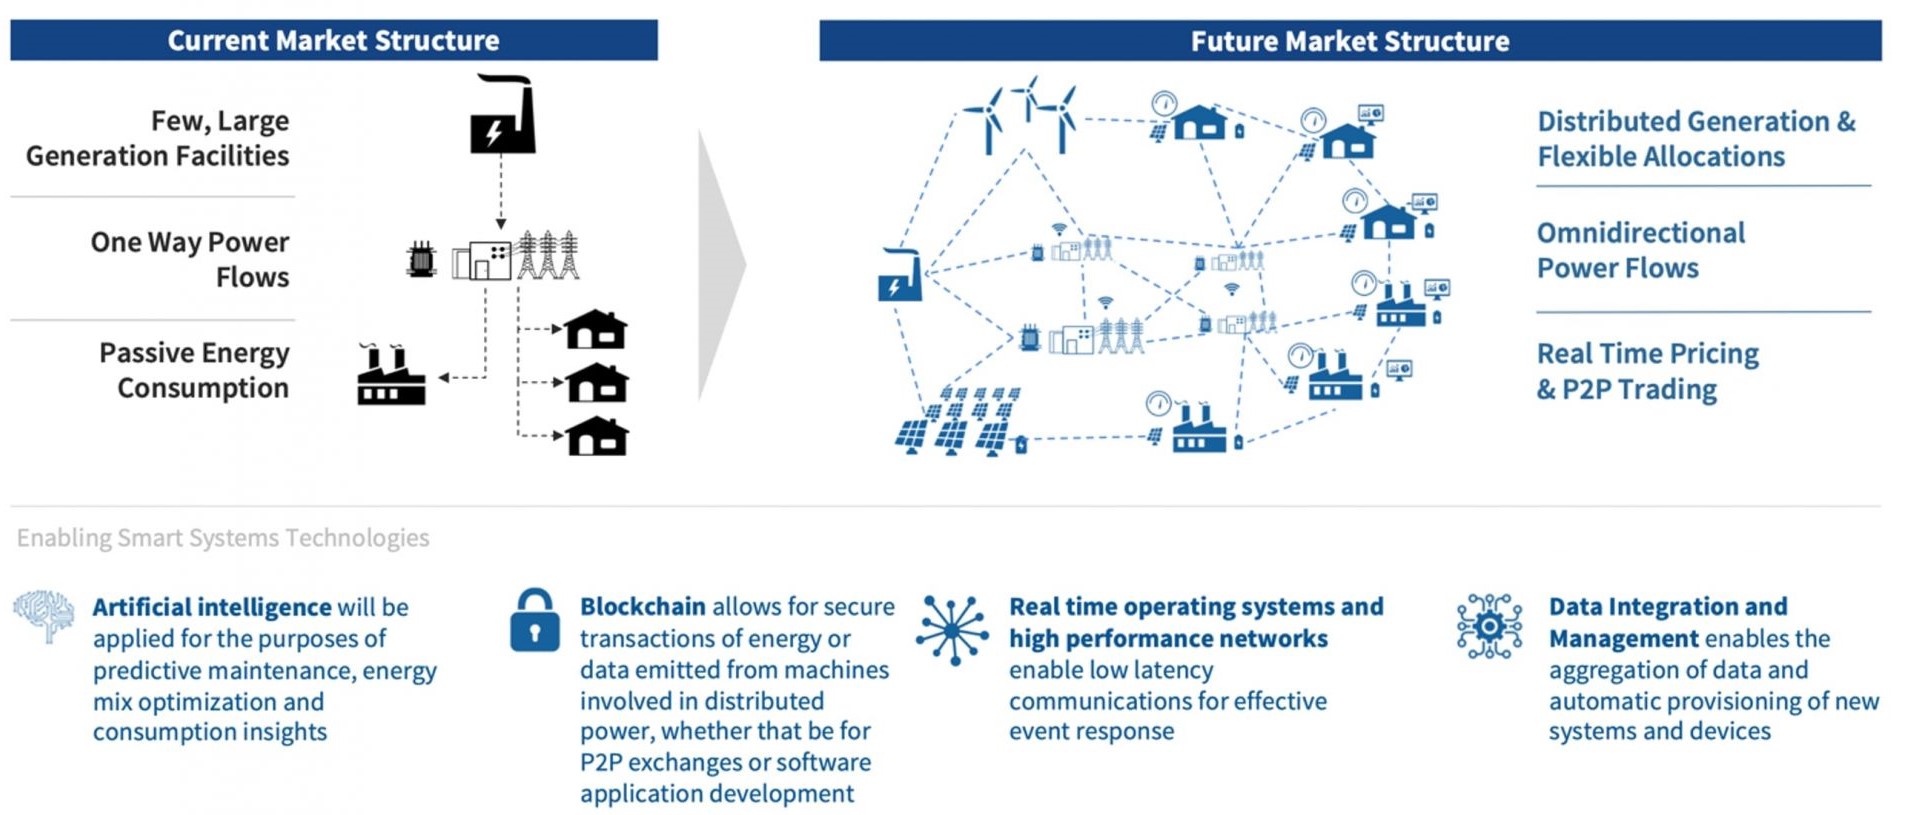 The Time Has Come | Microgrids meet Smart Systems | Smart power systems will drive a distributed energy future